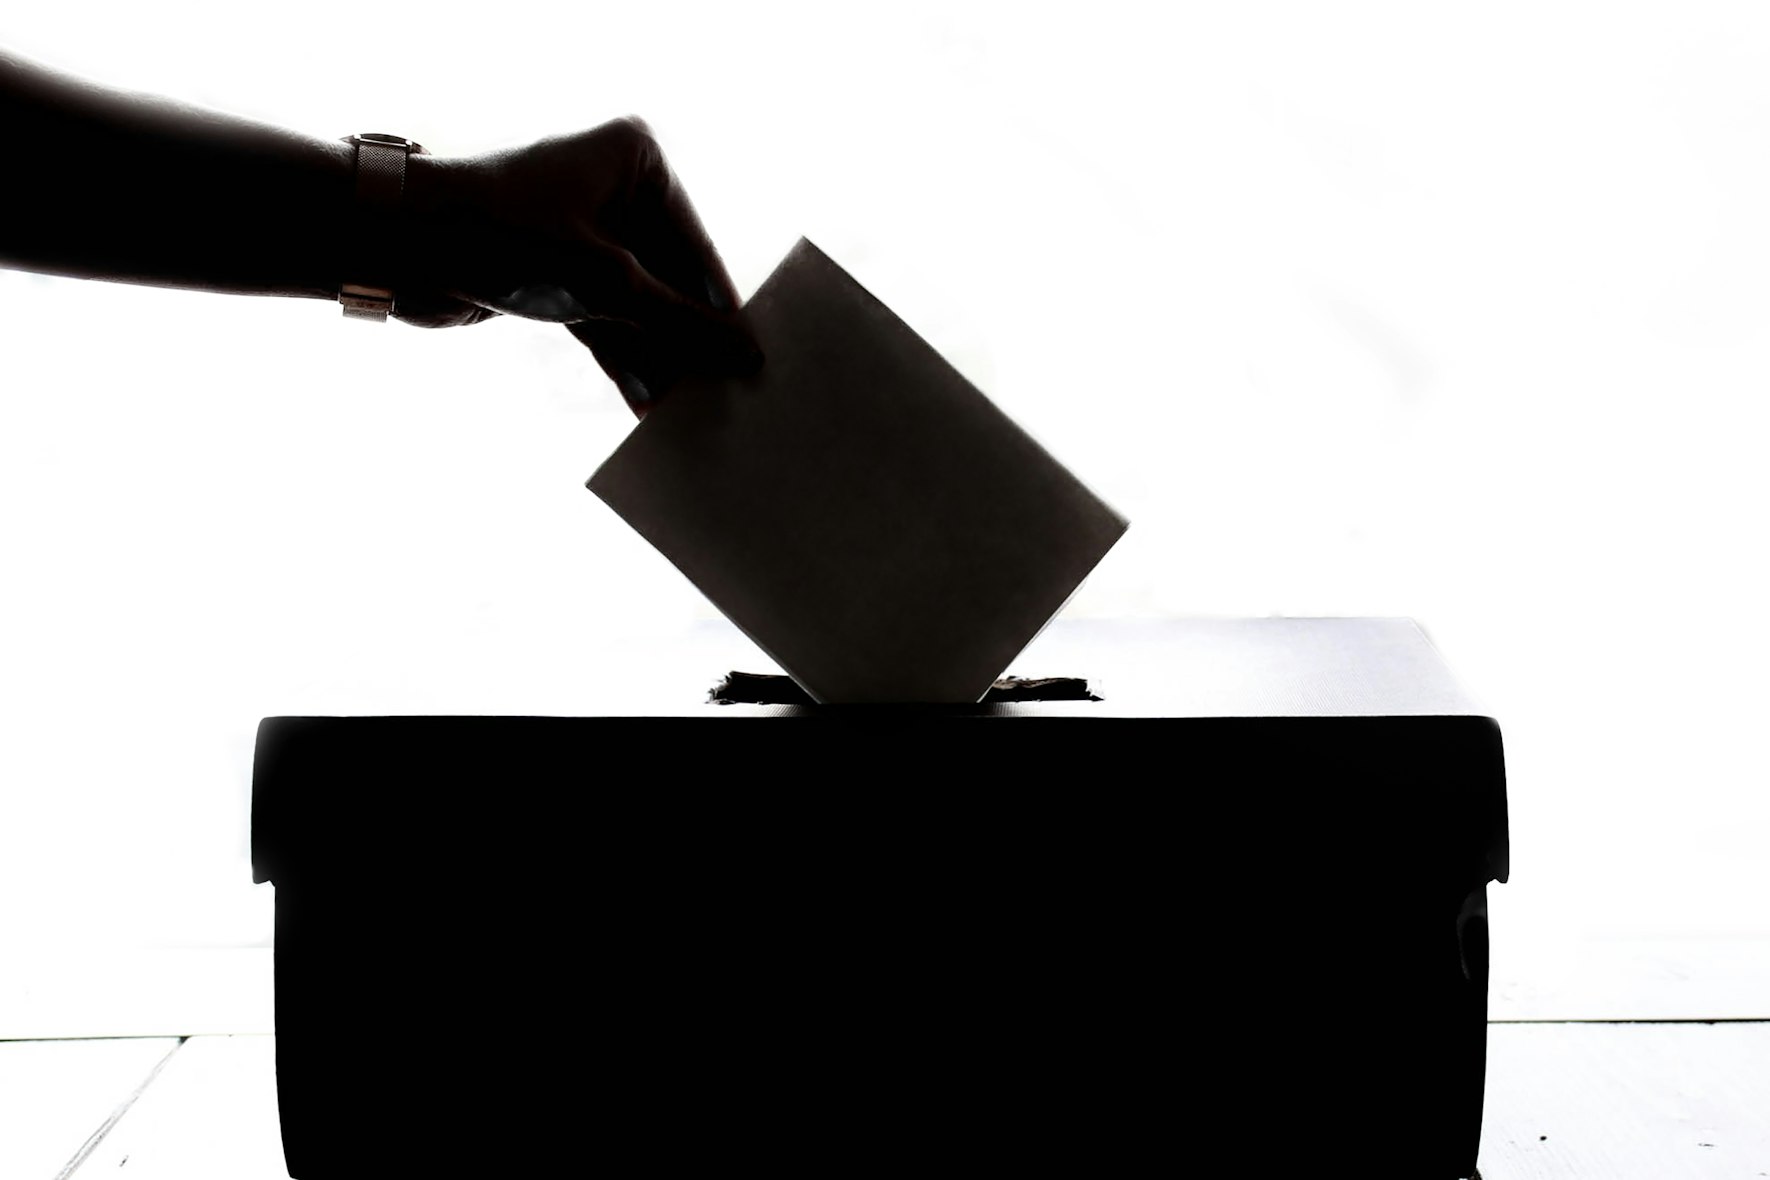 A Person Casting Their Vote https://unsplash.com/photos/a-person-is-casting-a-vote-into-a-box-T9CXBZLUvicA